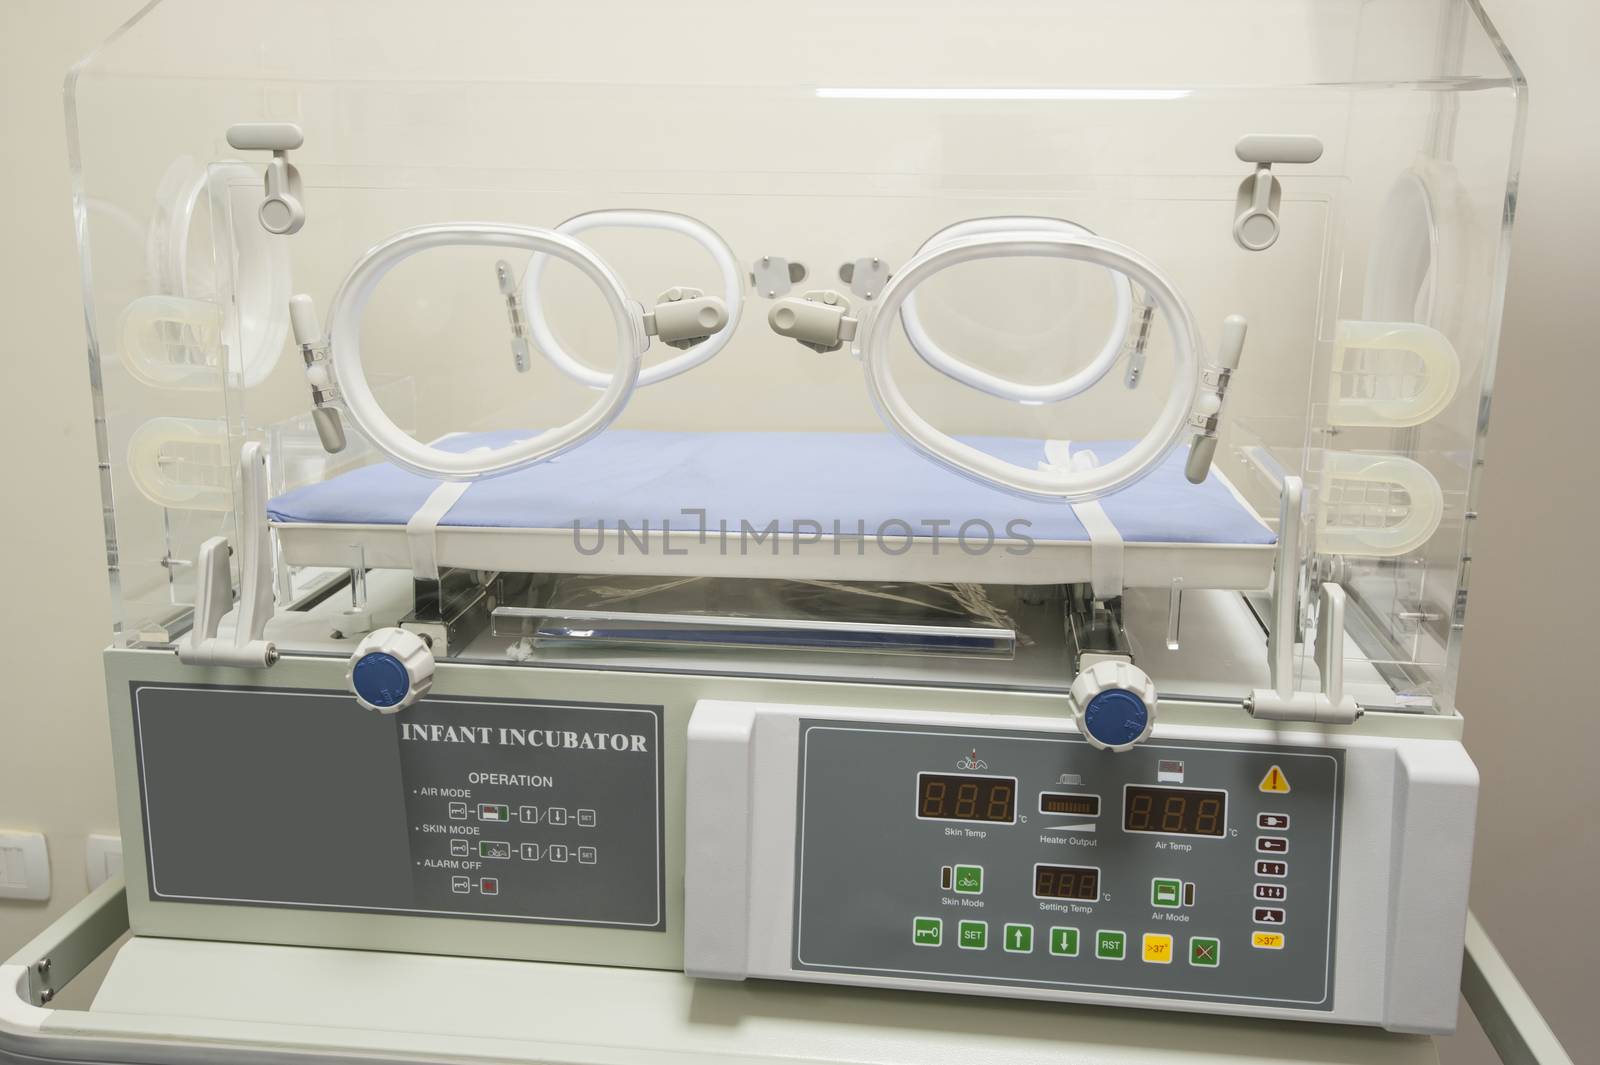 Closeup of infant incubator technology in a medical center hospital